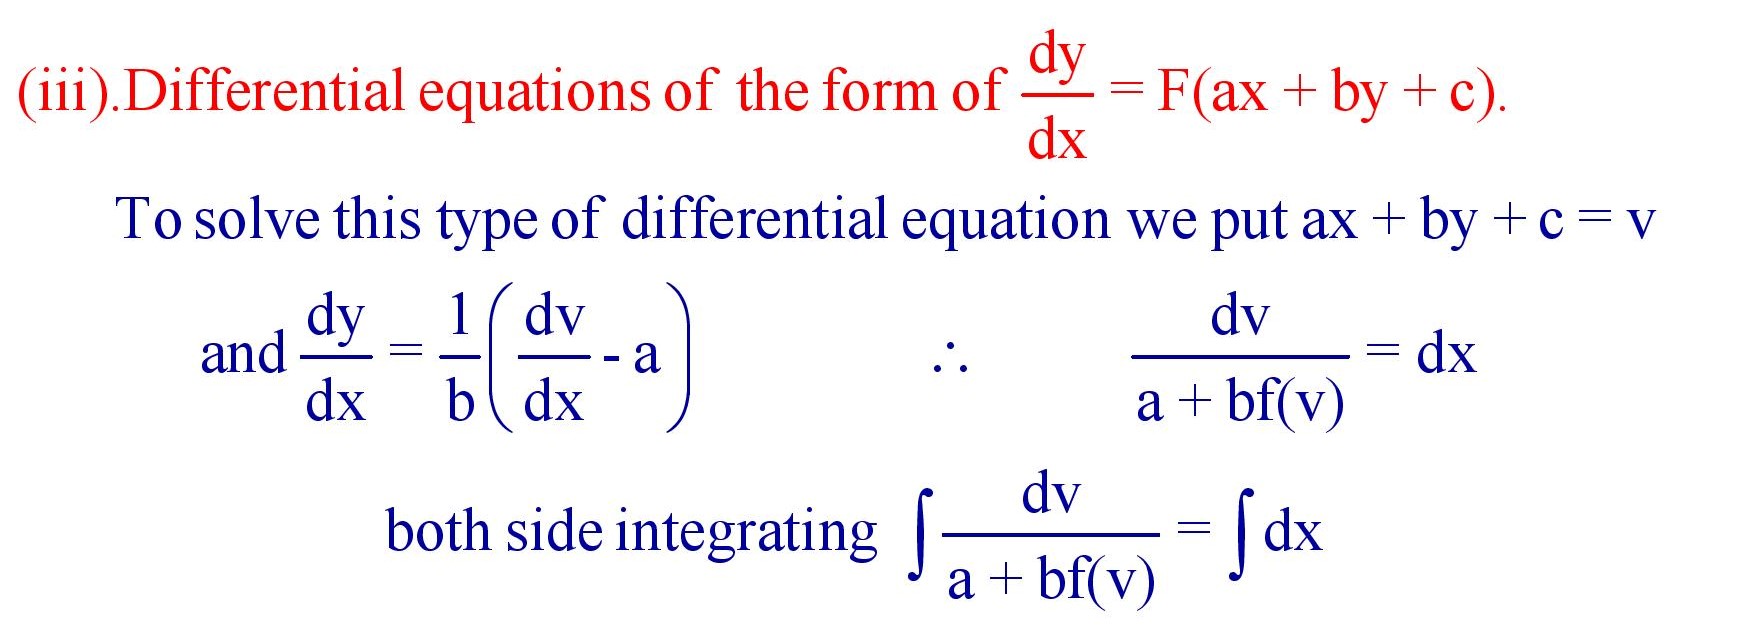 Methods of solving a first degree differential equation